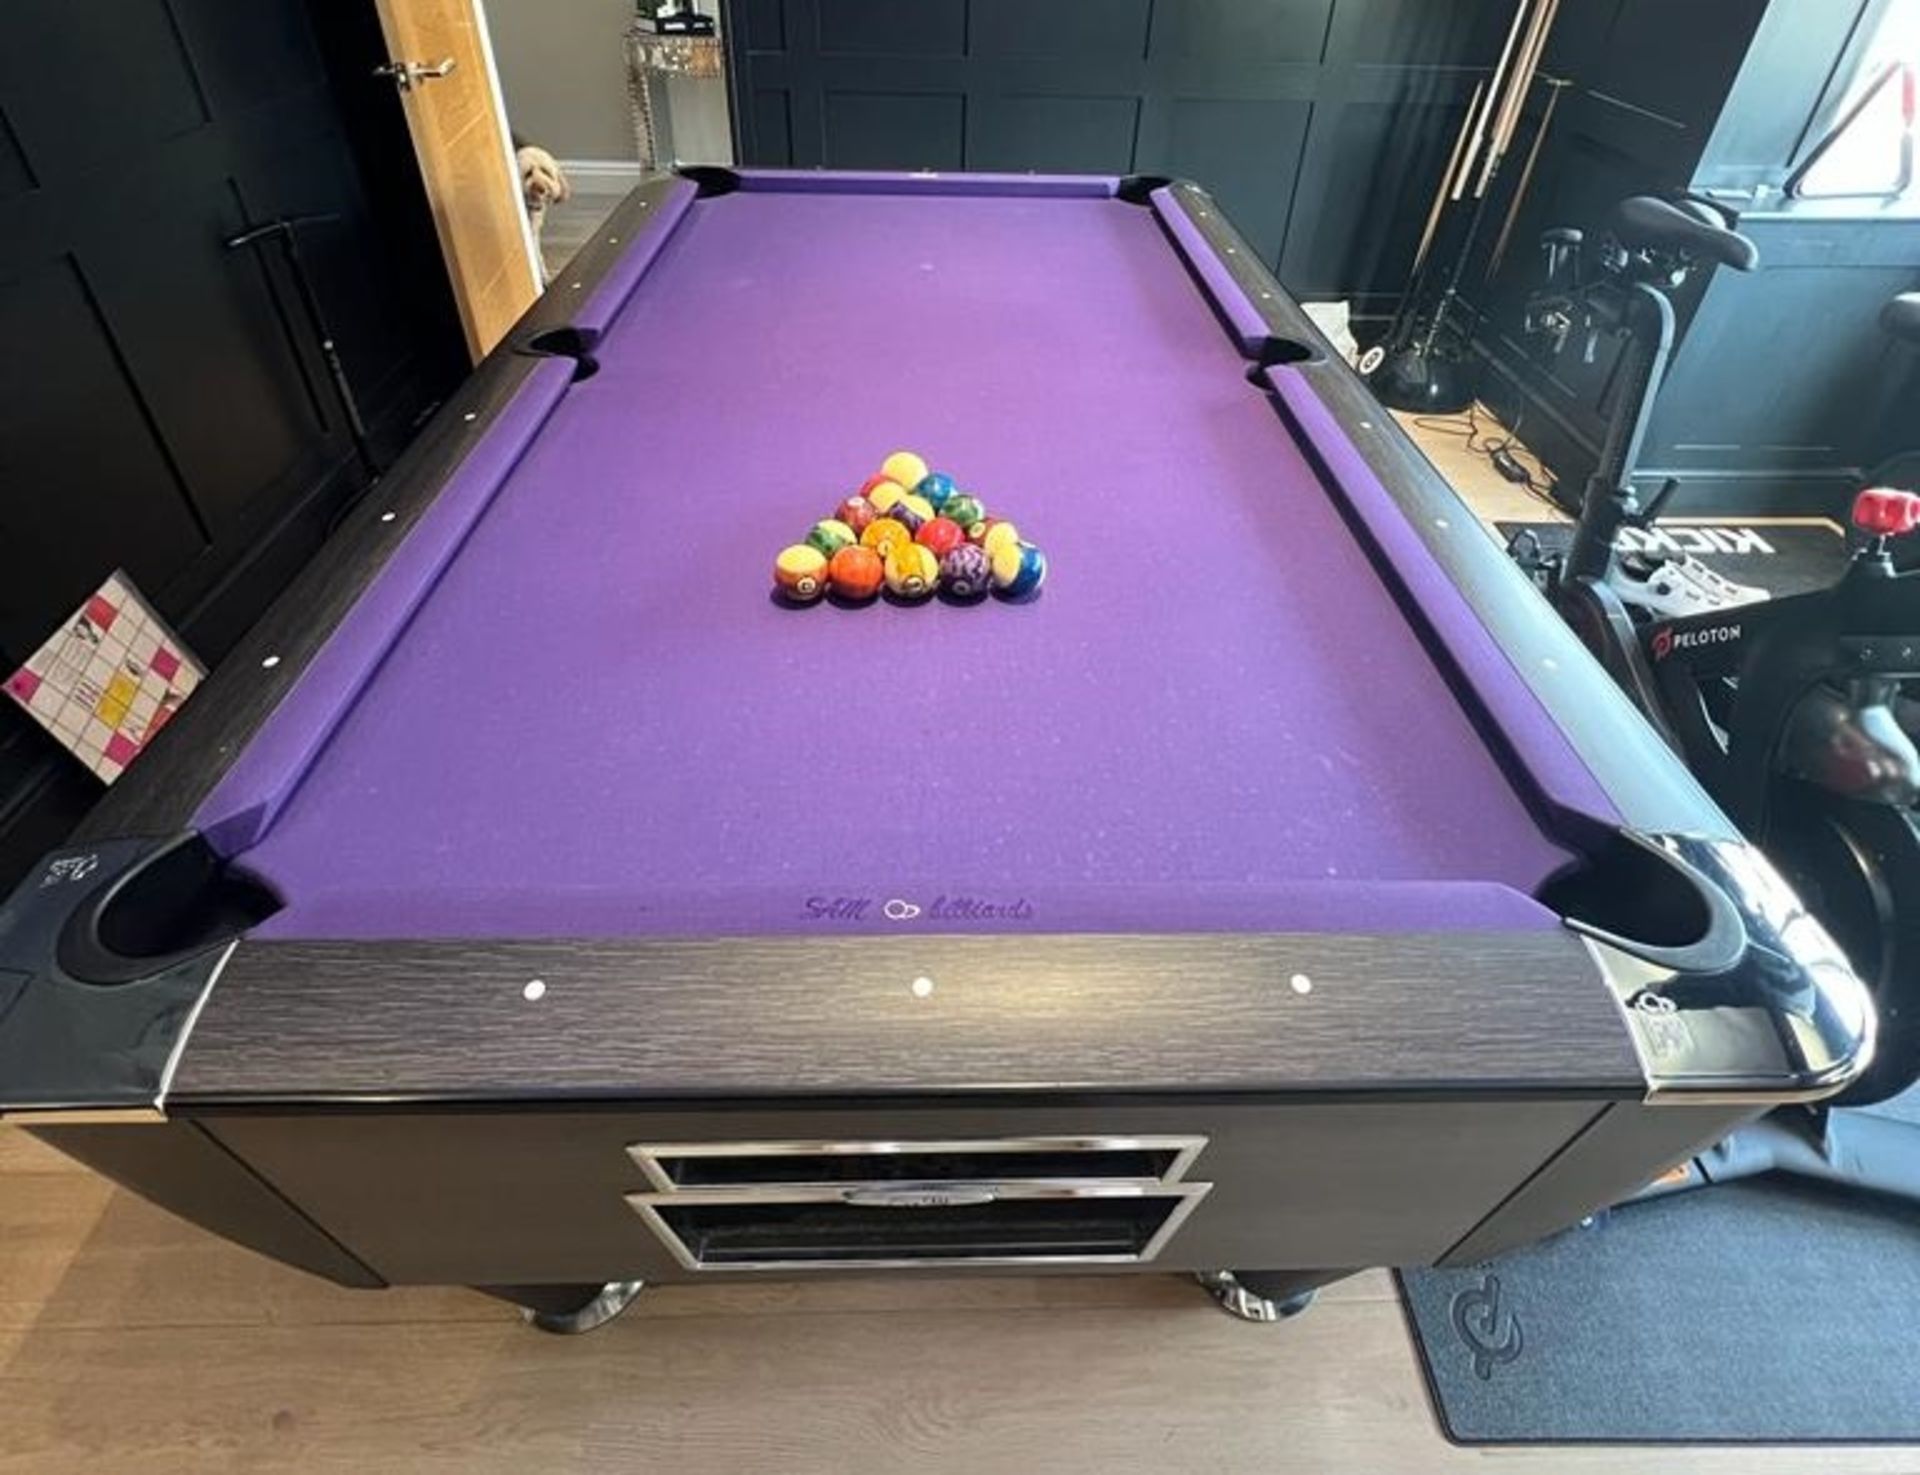 1 x SAM Billiards 7' x 4' Pool Table With Cues - CL011 - Location: Greater Manchester - Image 4 of 5